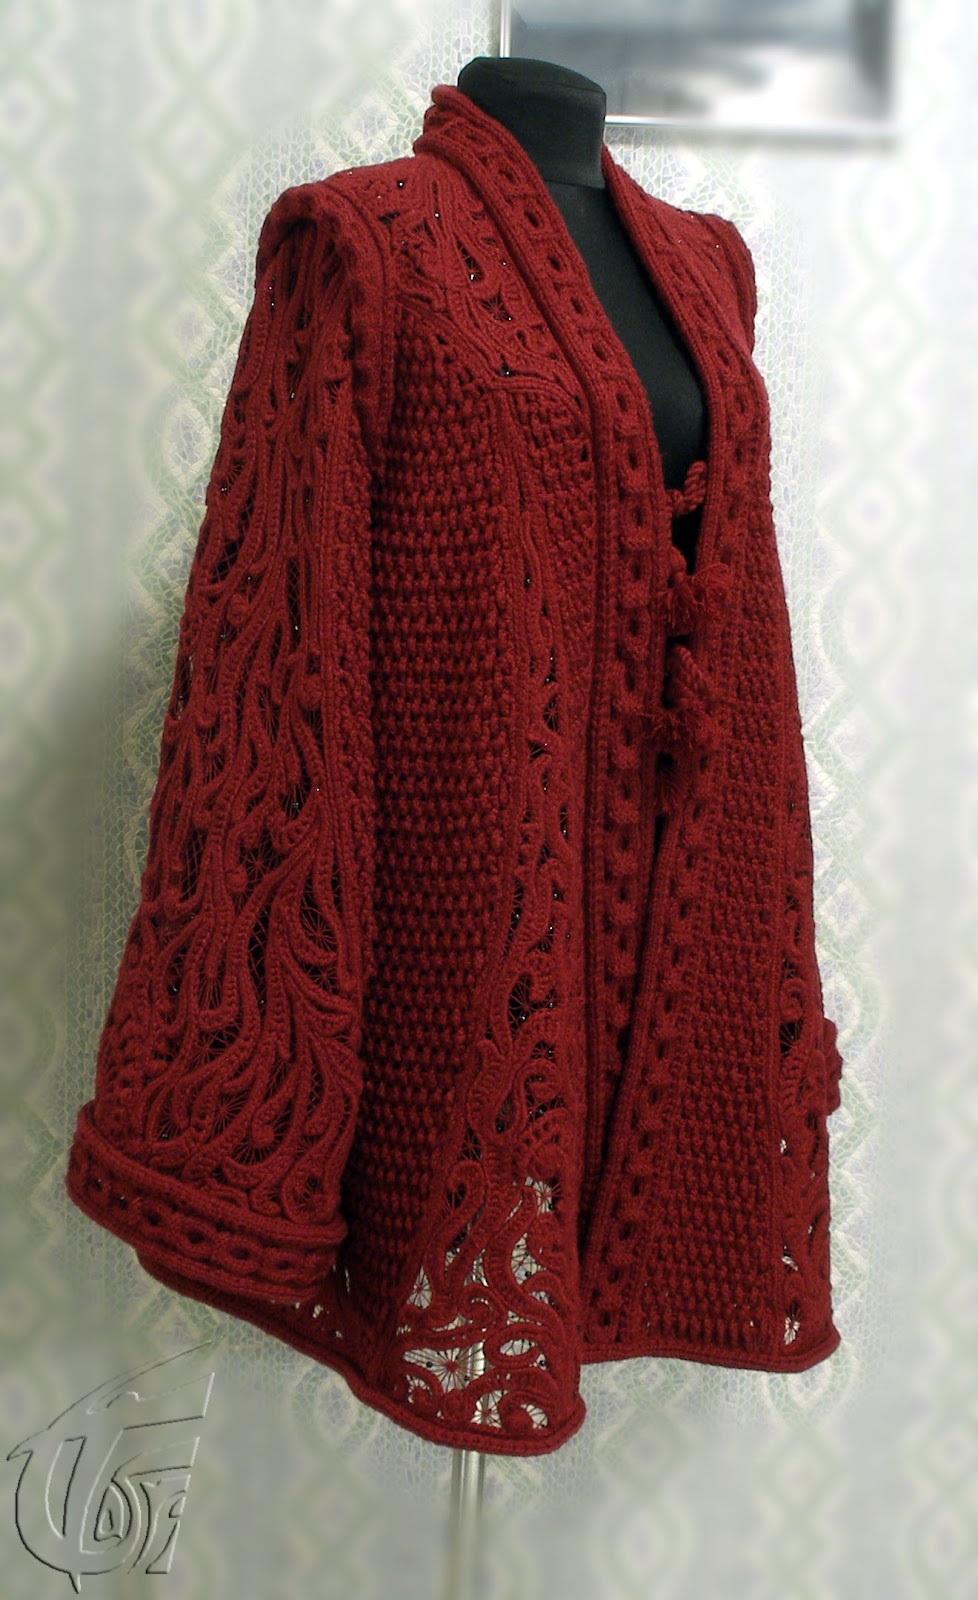 crochet knit unlimited: More pictures of the Coat